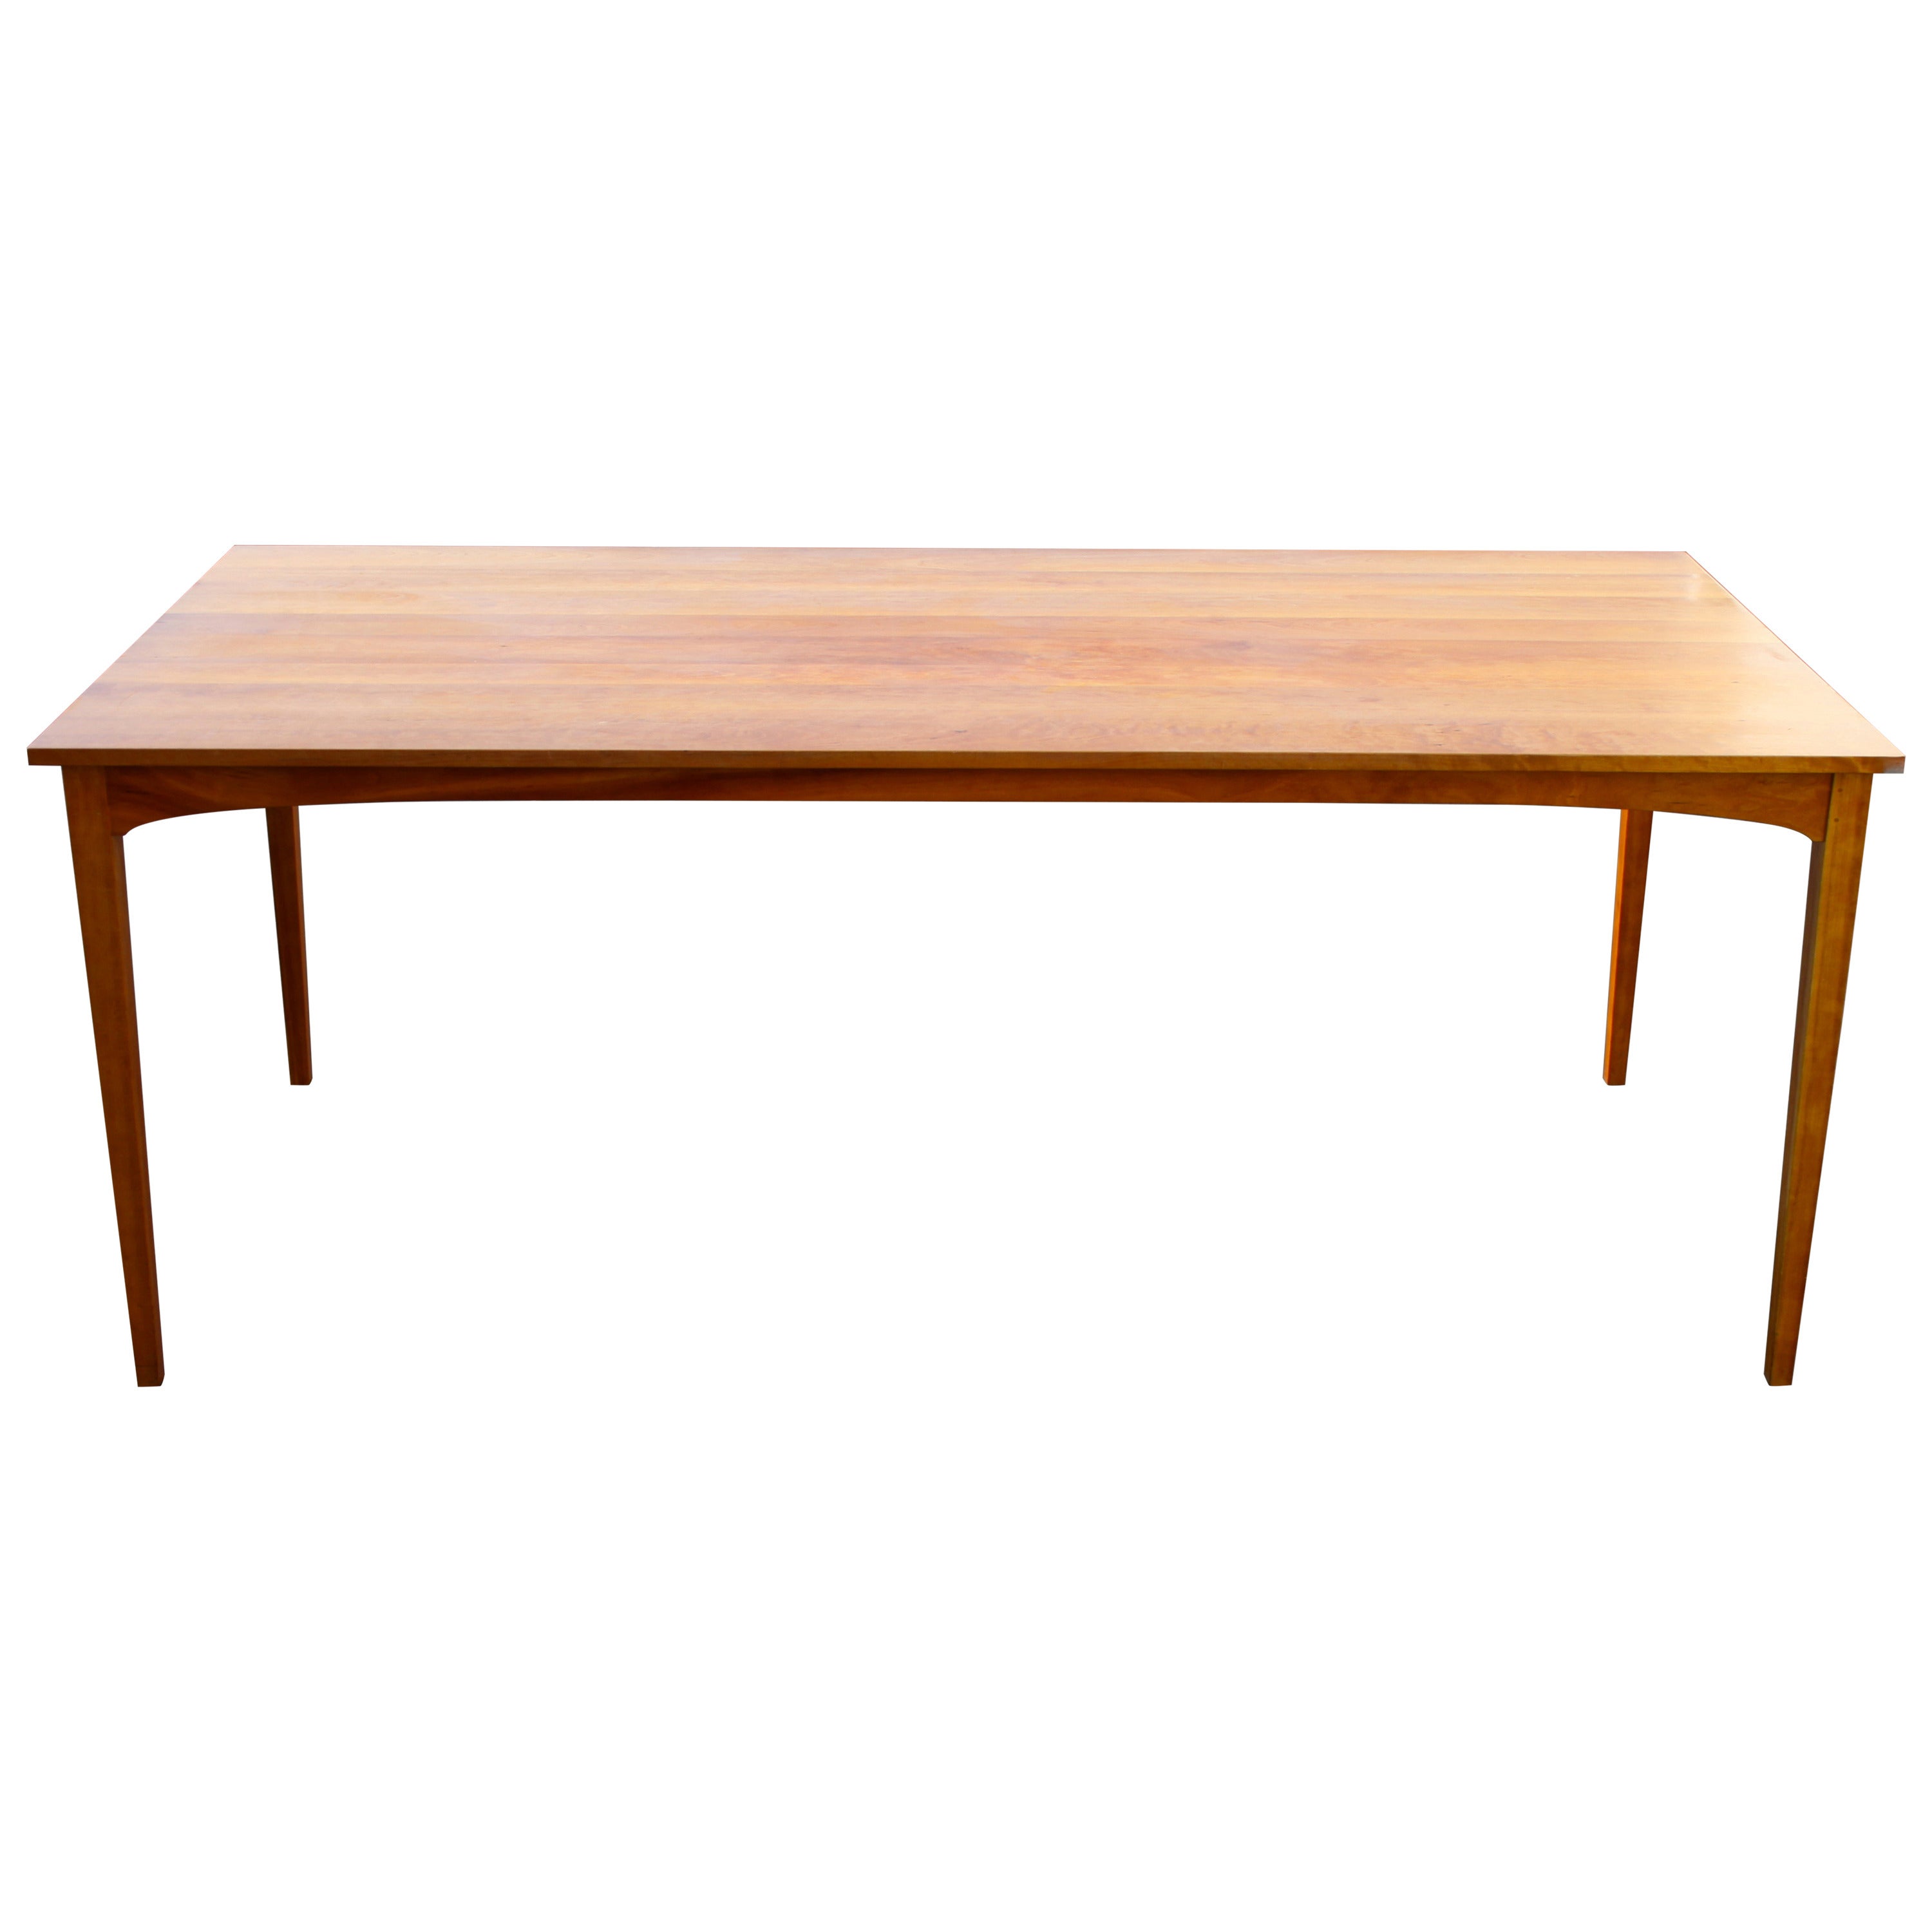 Thomas Moser Dining or Conference Table Built by Rachel R. Levesque